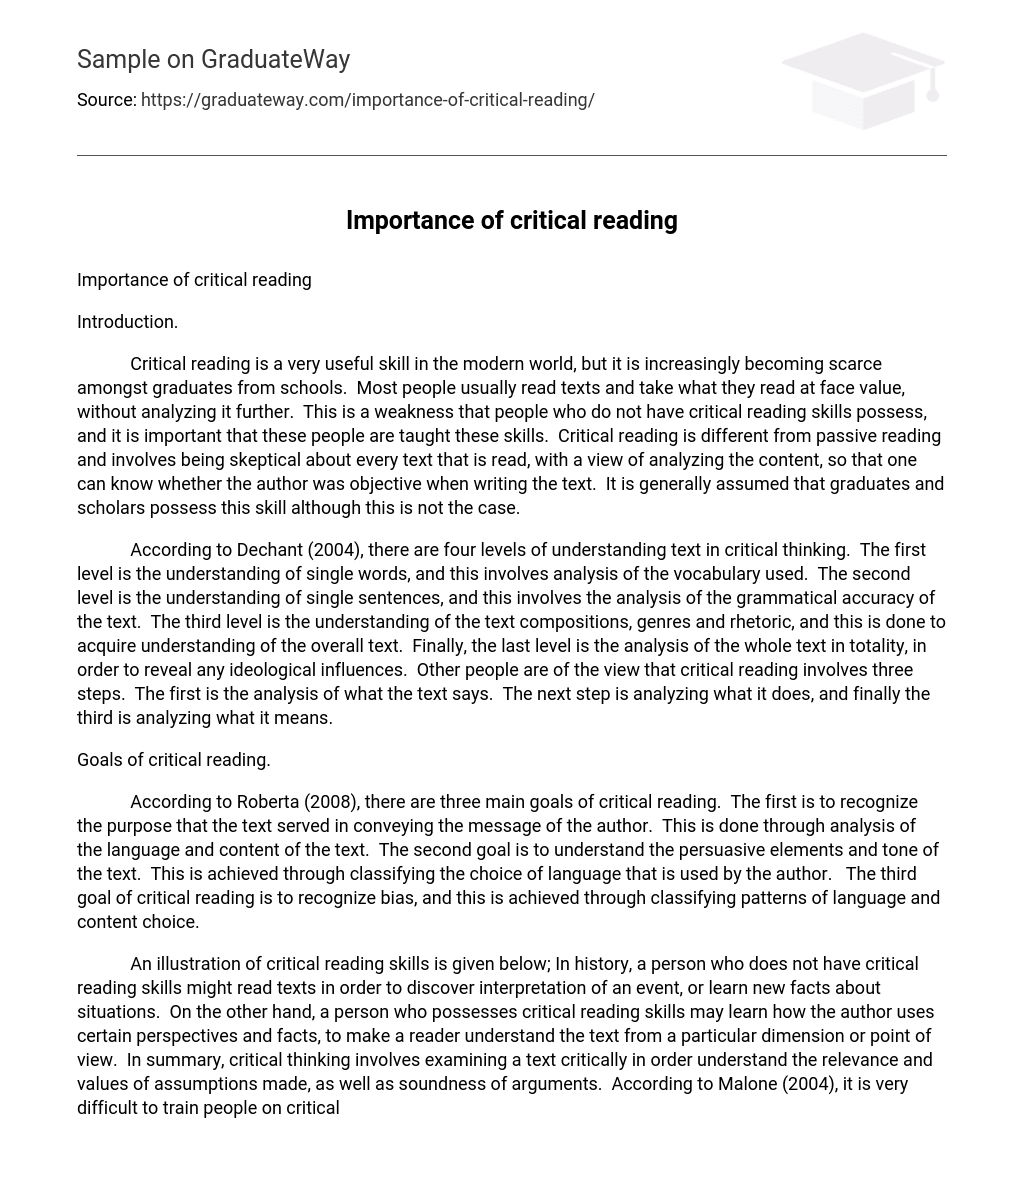 critical reading essay introduction